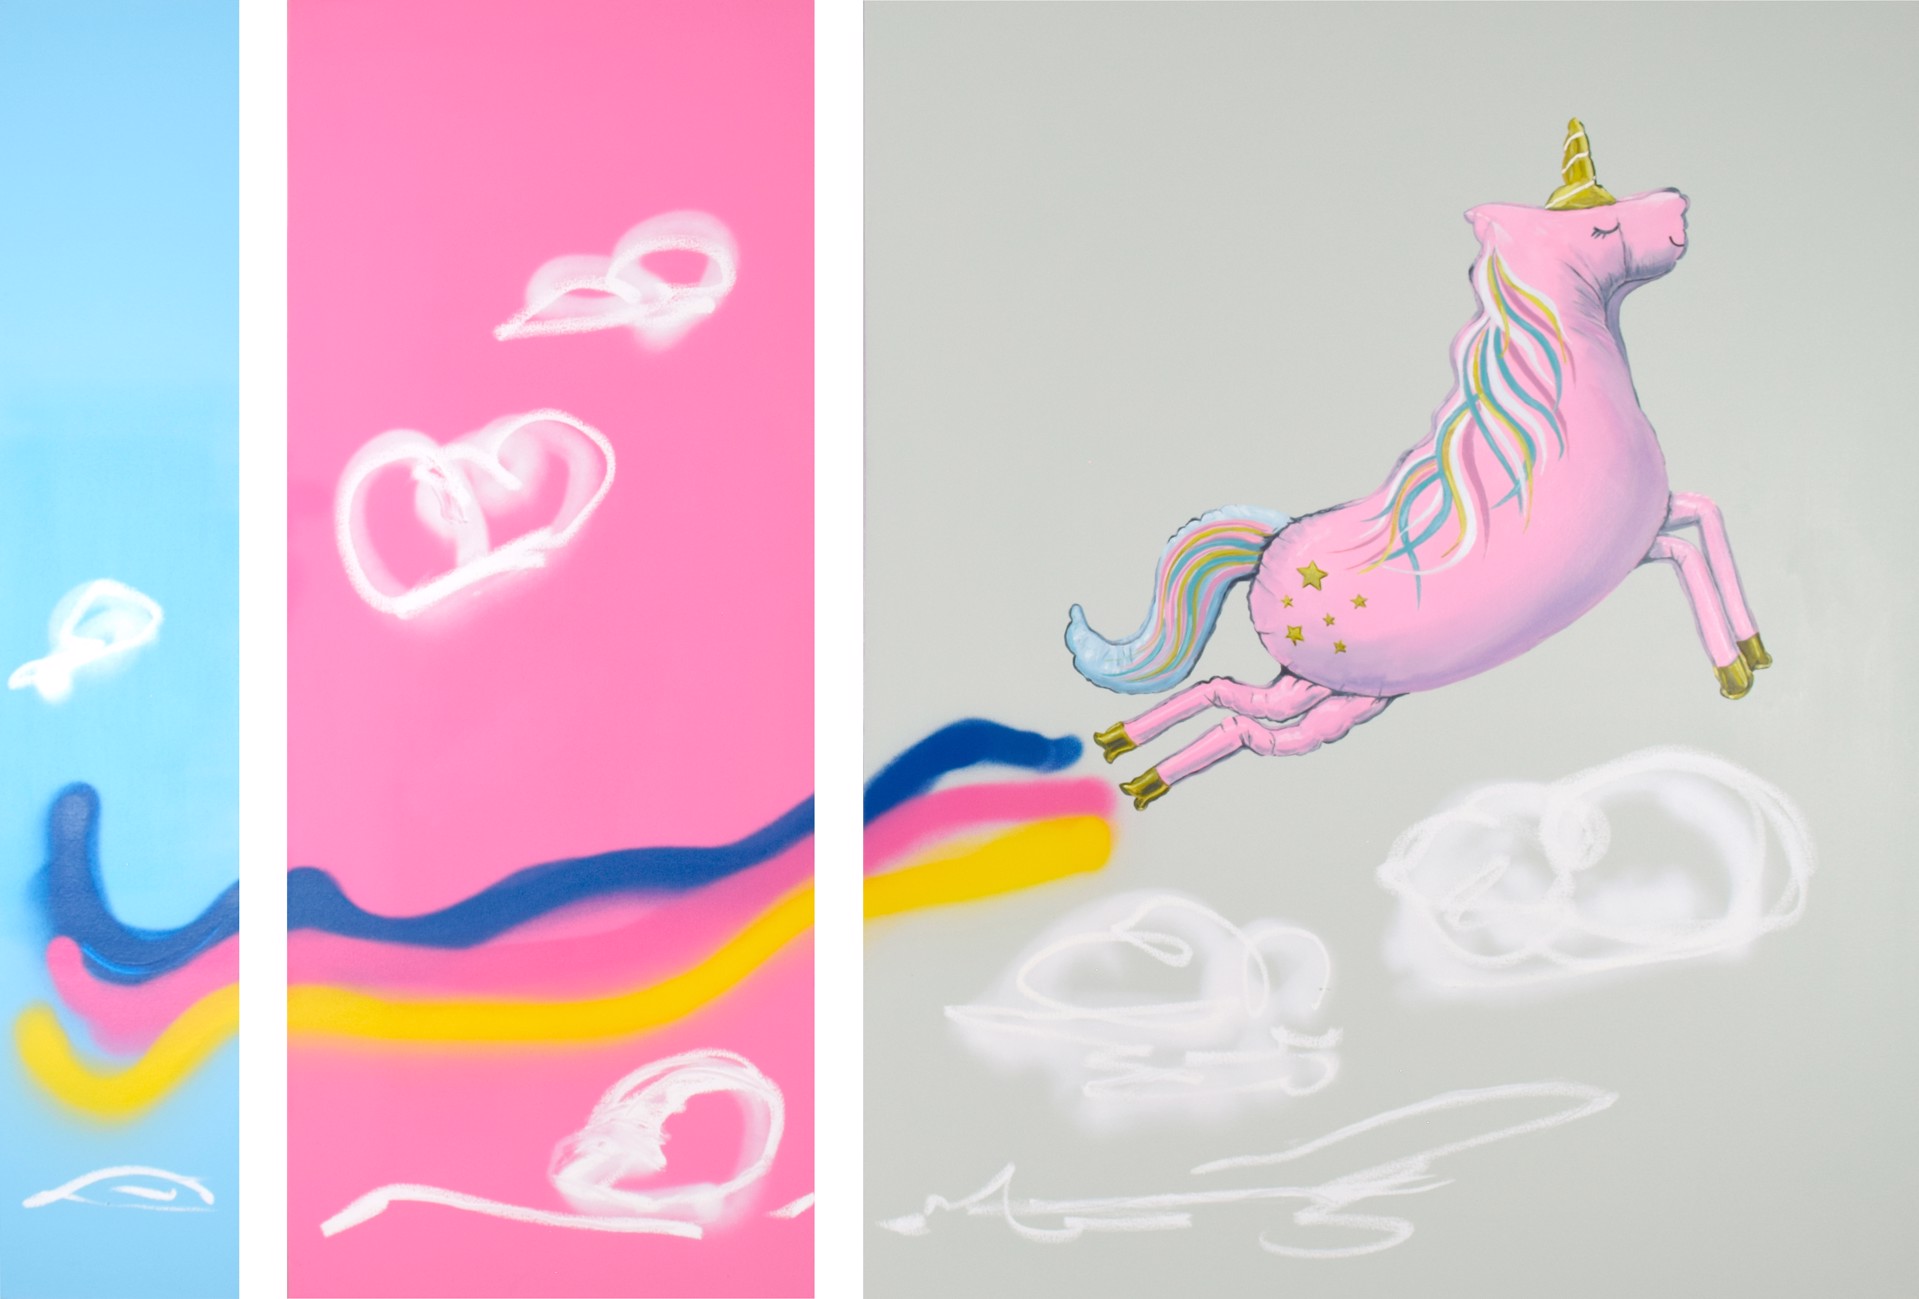 WORK YOUR MAGIC (TRIPTYCH) by ADAM UMBACH